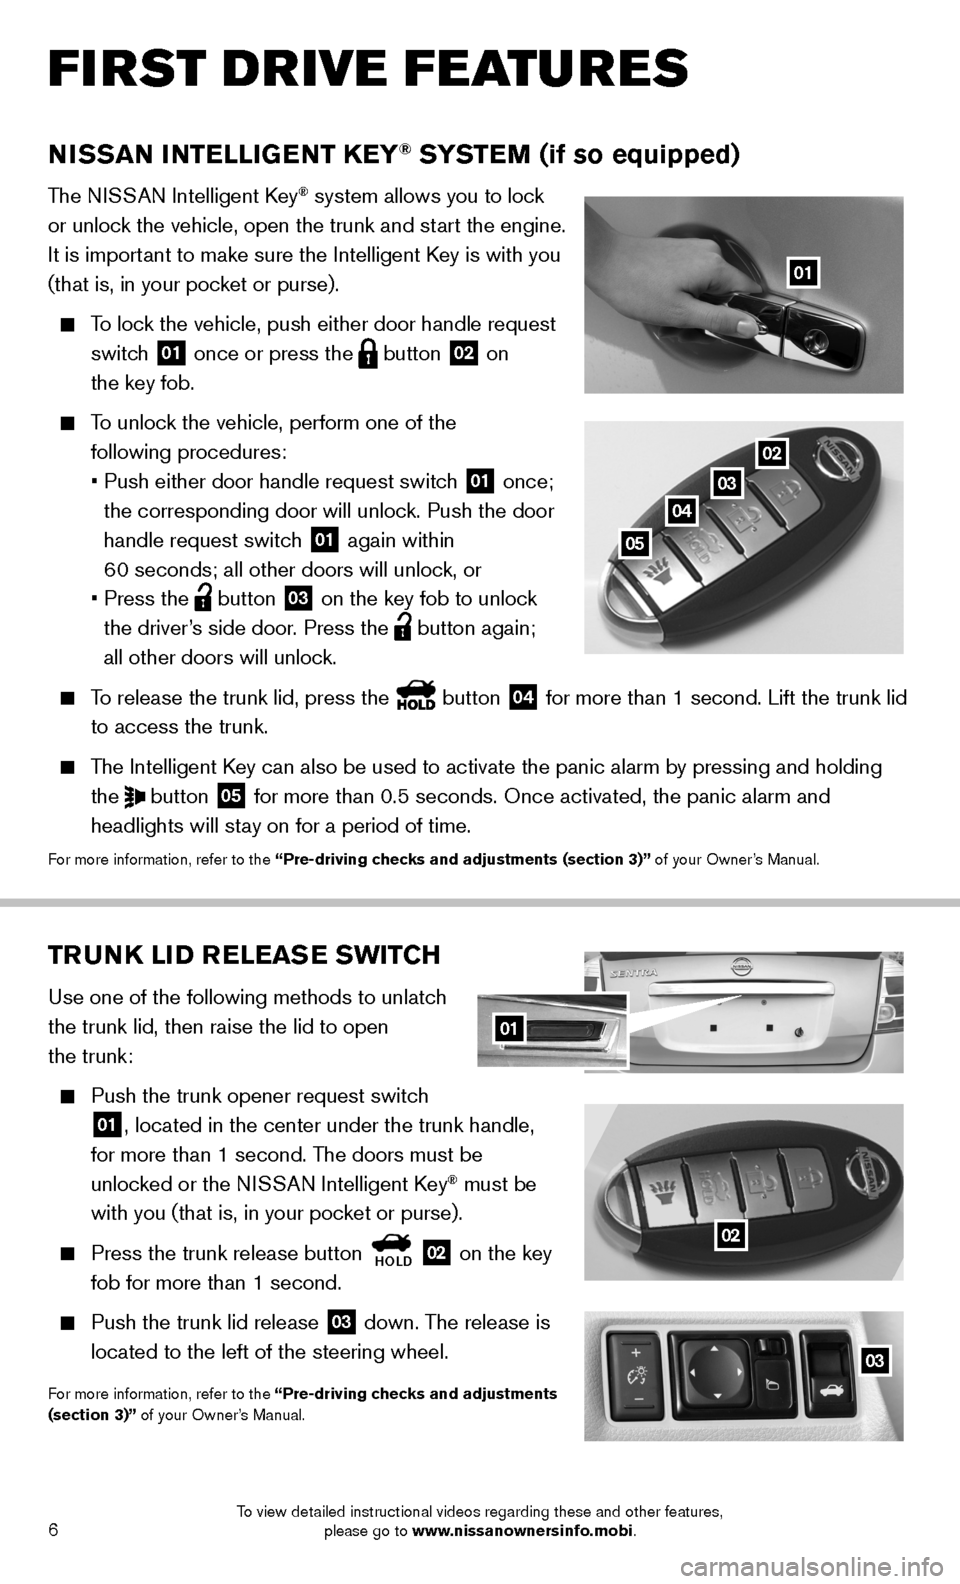 NISSAN SENTRA 2014 B17 / 7.G Quick Reference Guide 6
02TRUNK LID RELEASE SWITCH
Use one of the following methods to unlatch  
the trunk lid, then raise the lid to open  
the trunk:
 
   Push the trunk opener request switch 
01, located in the center u